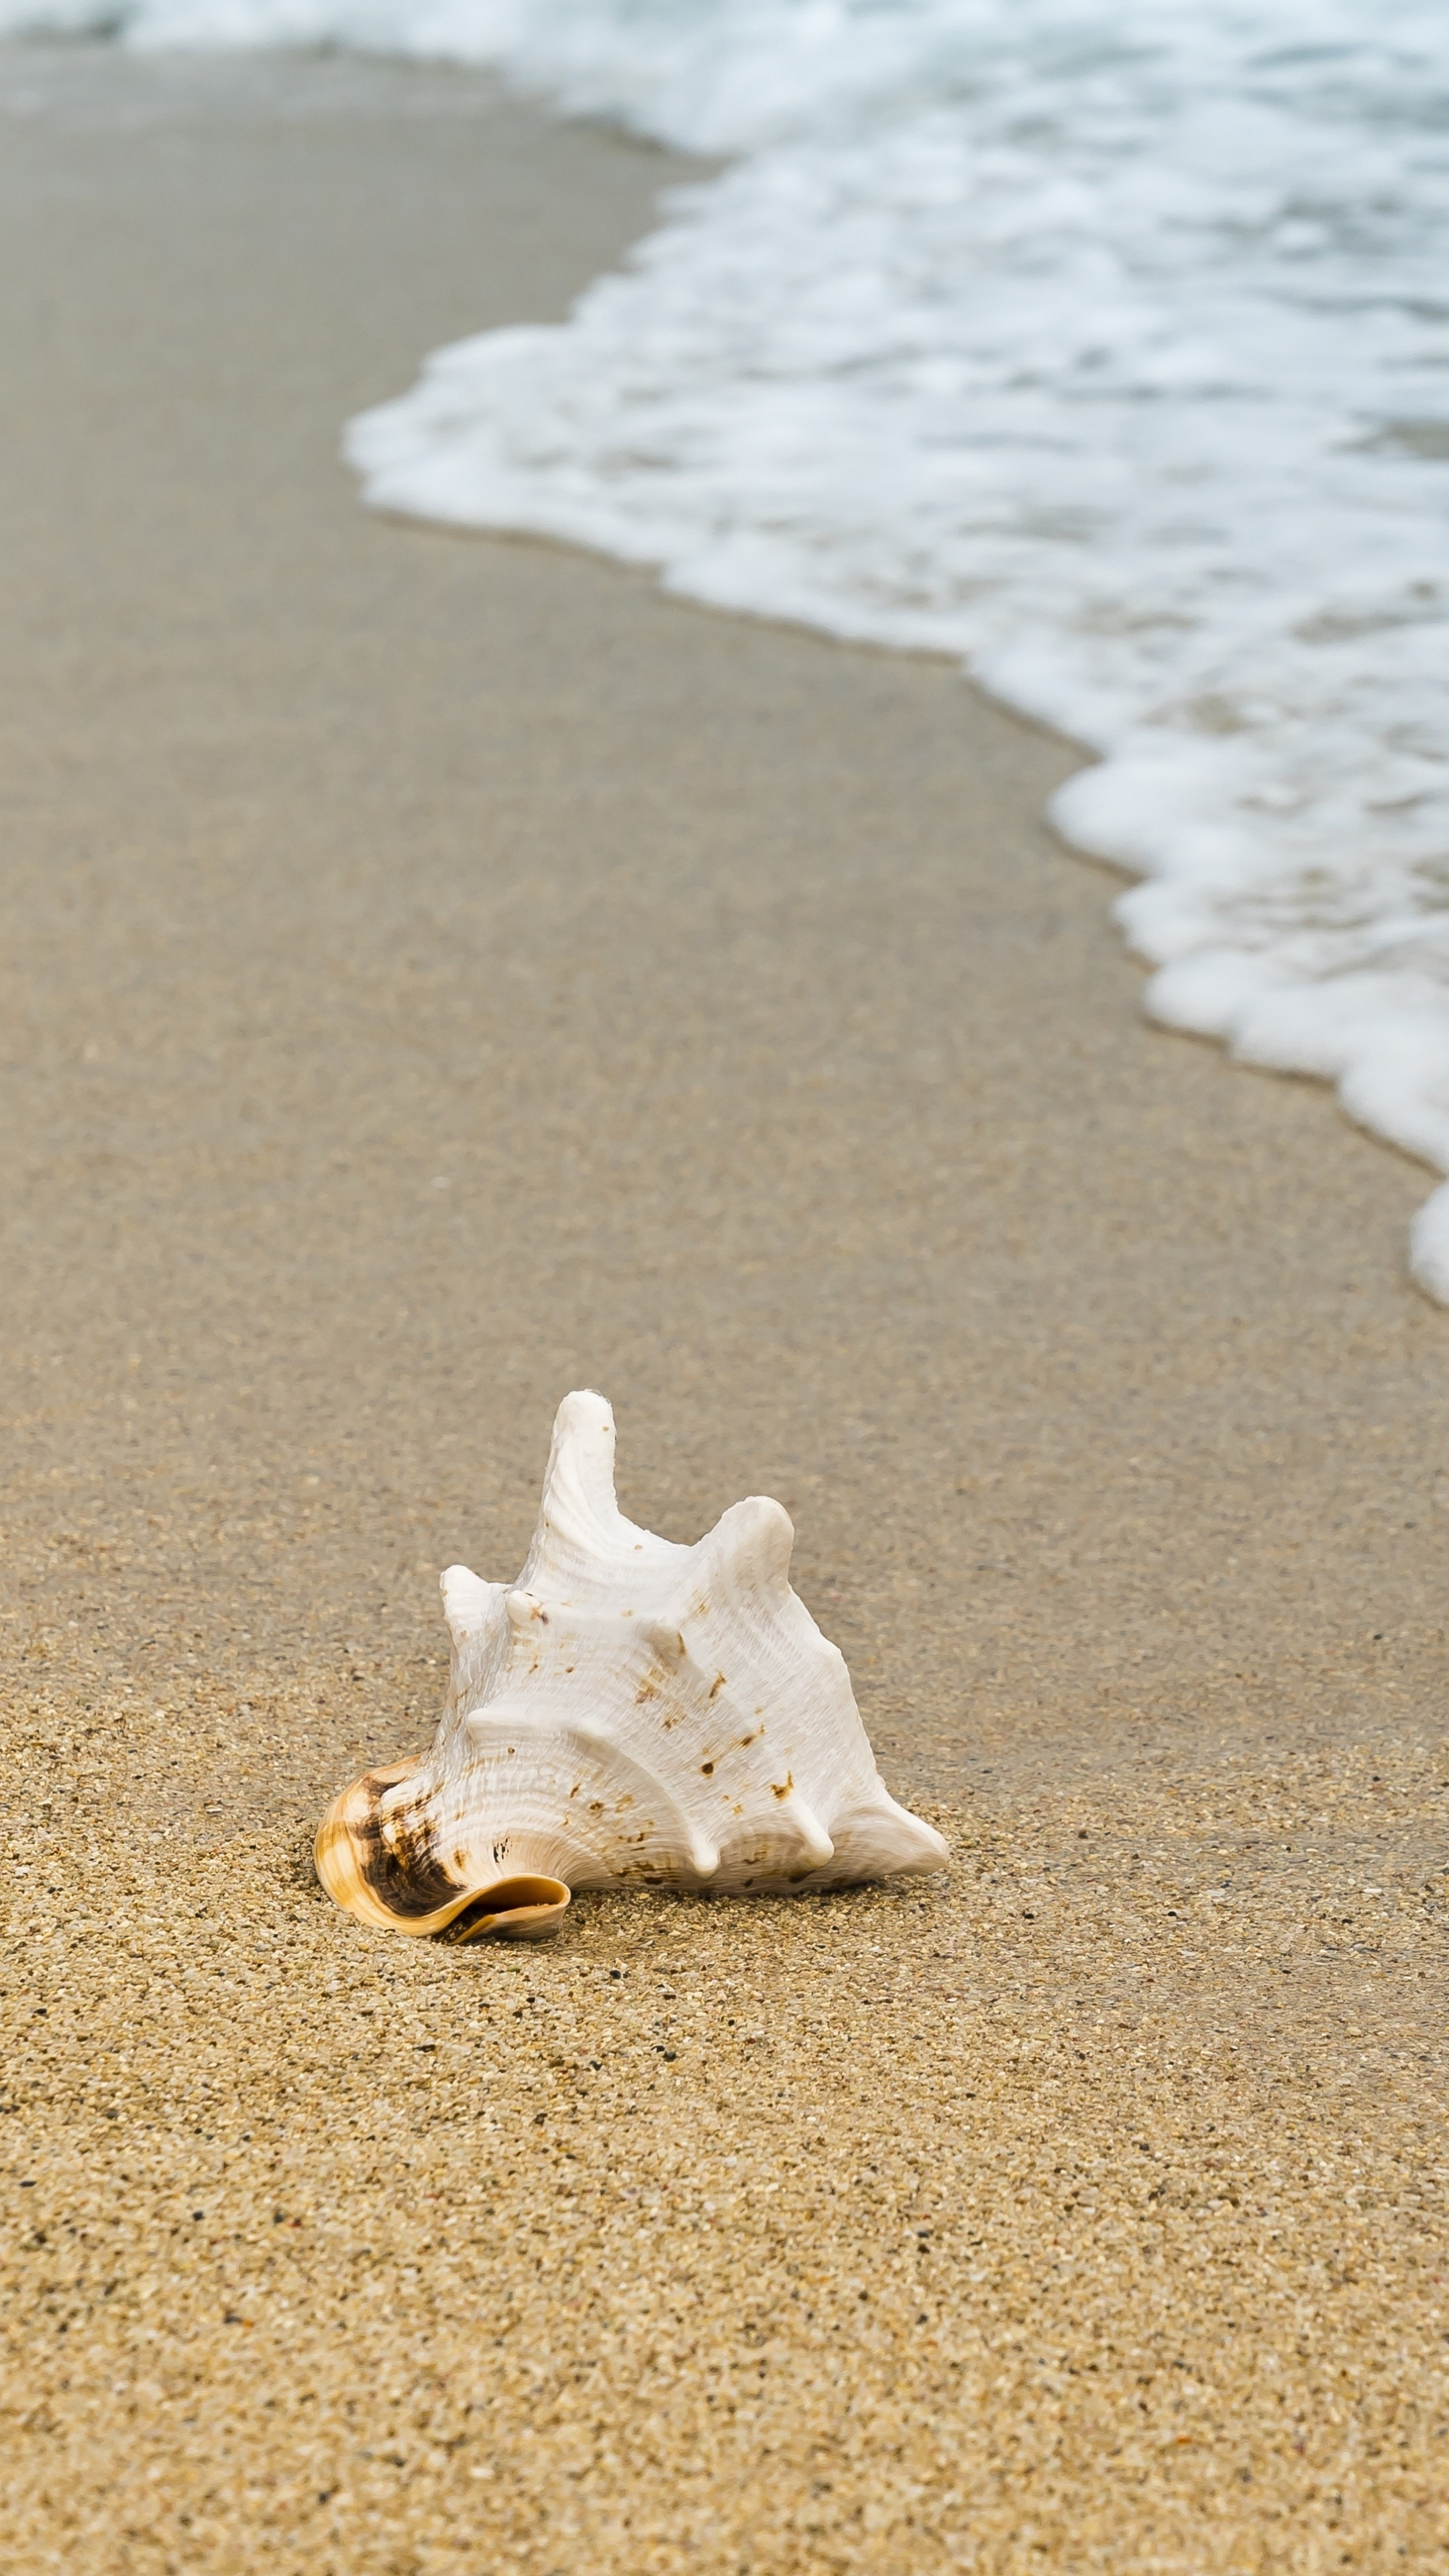 Sea Shell: Sand, Waves, Beach, Formed by using different minerals and proteins. 2160x3840 4K Background.